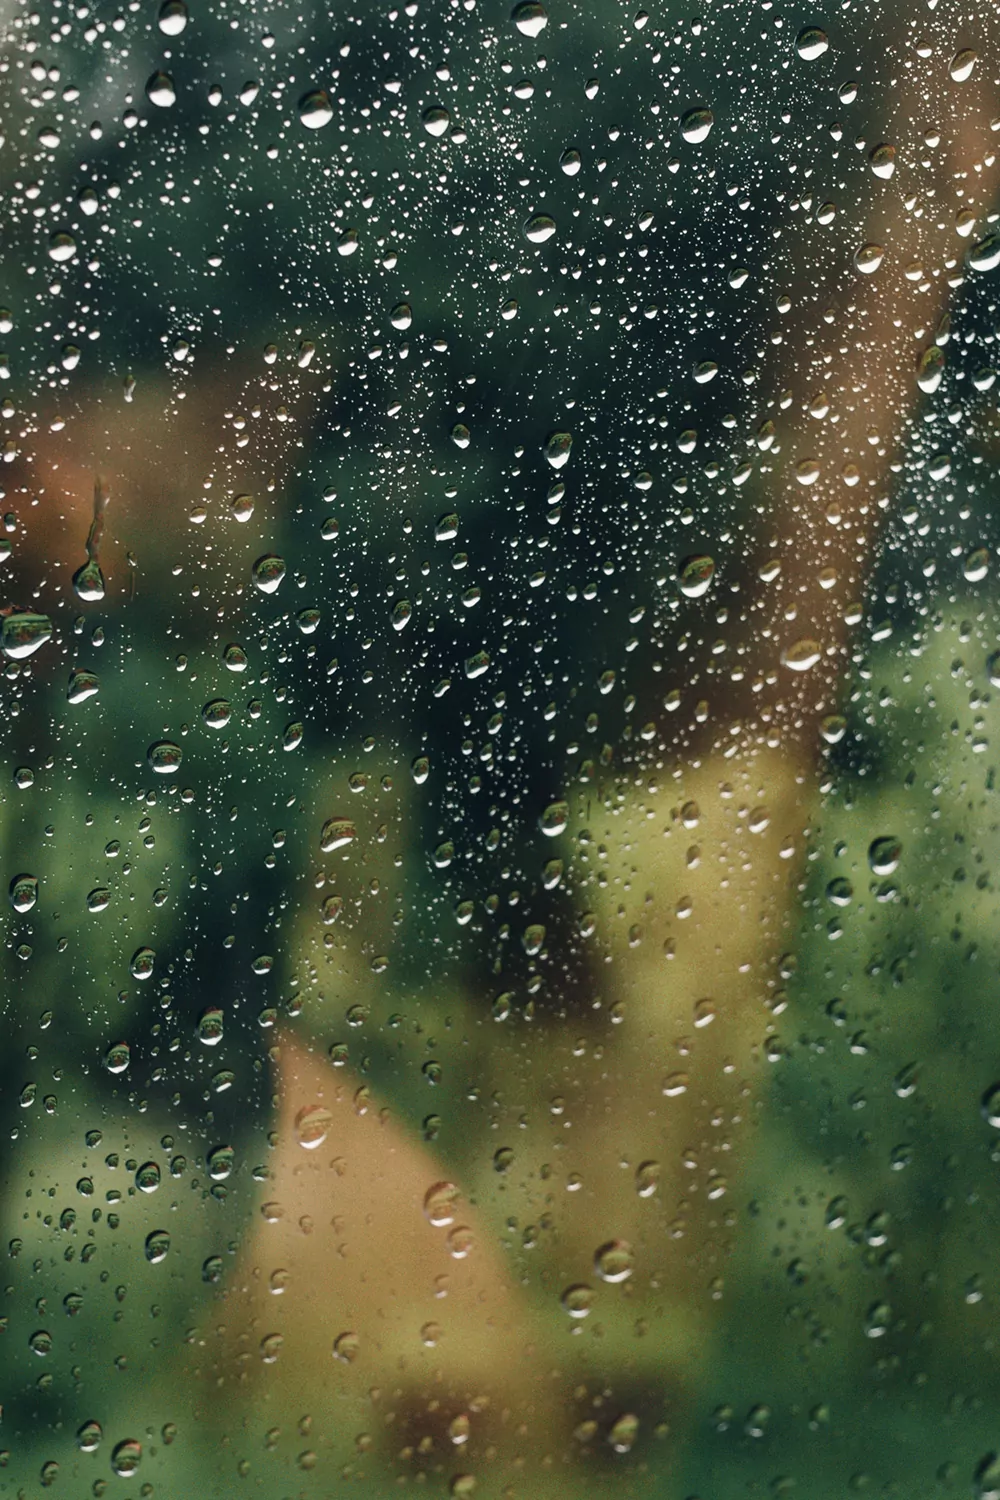 Raindrops on a window with a blurry green leafy background.